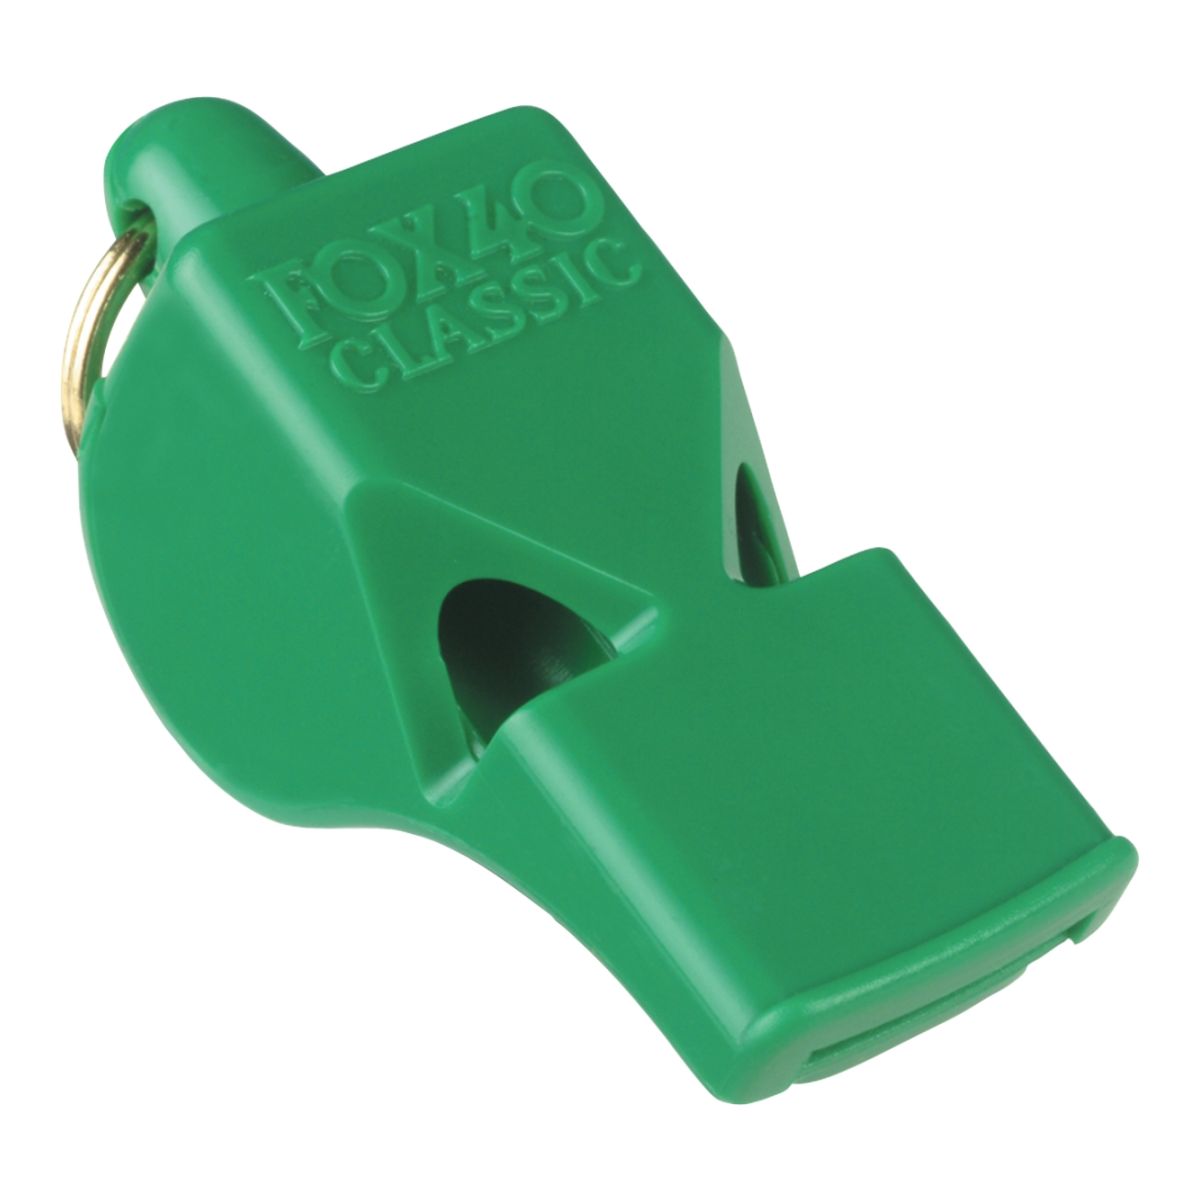 Fox 40 Classic Safety Pealess Whistle